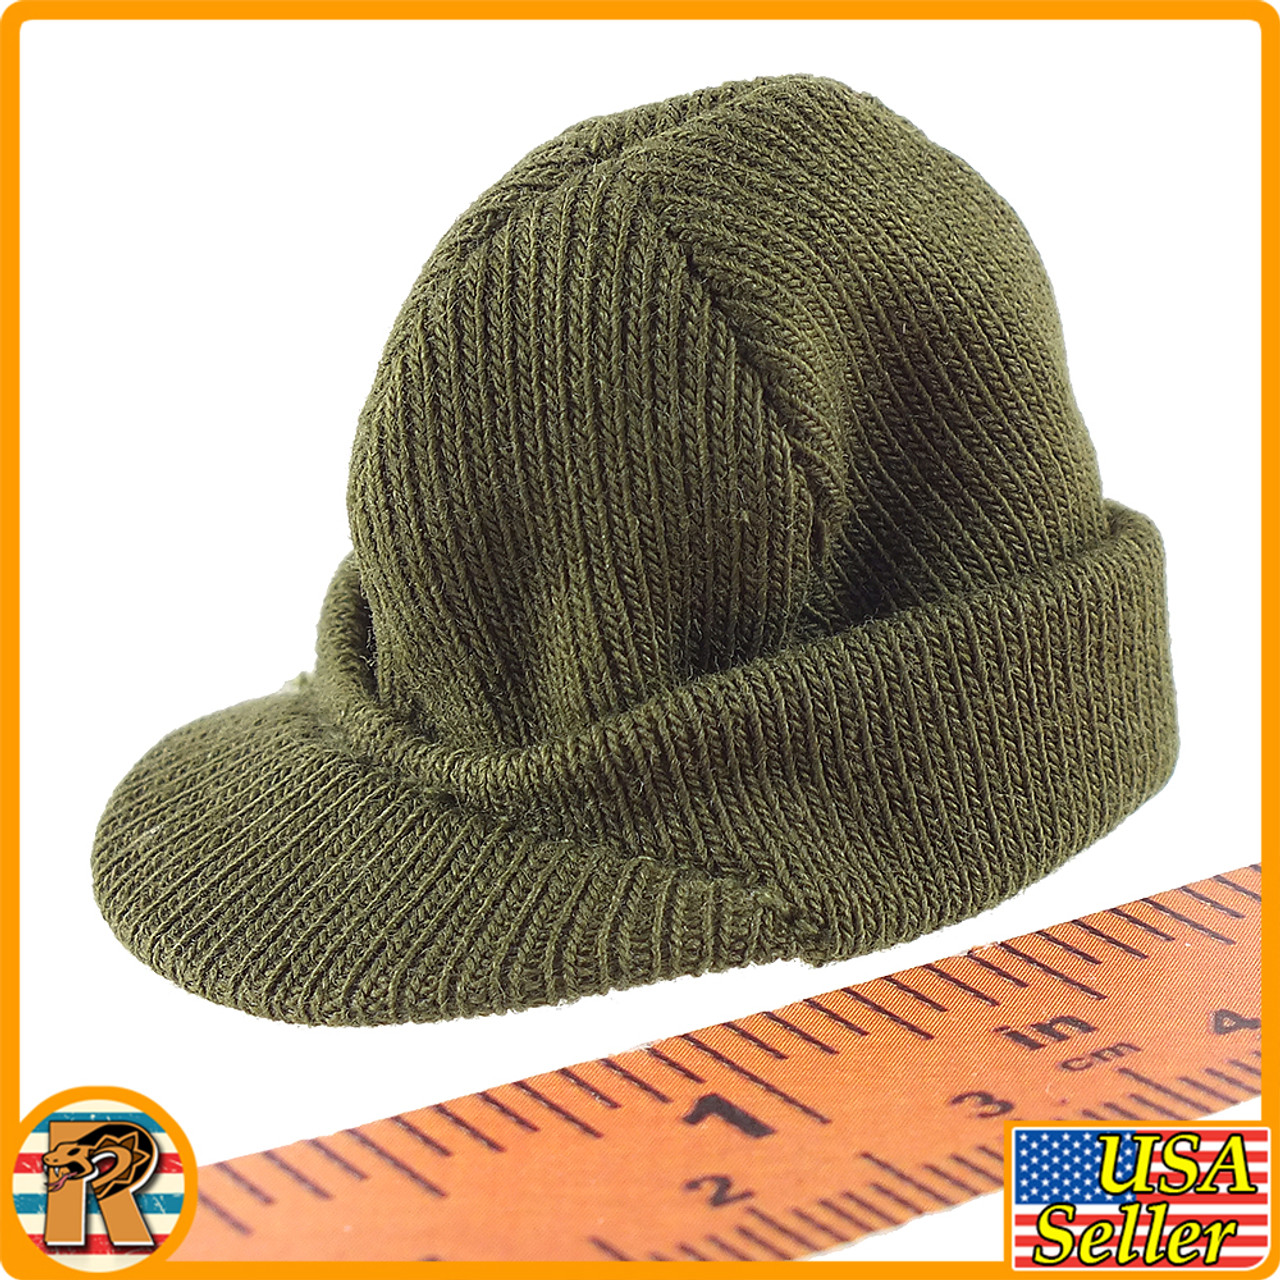 Corporal Upham - Knit Cap - 1/6 Scale -